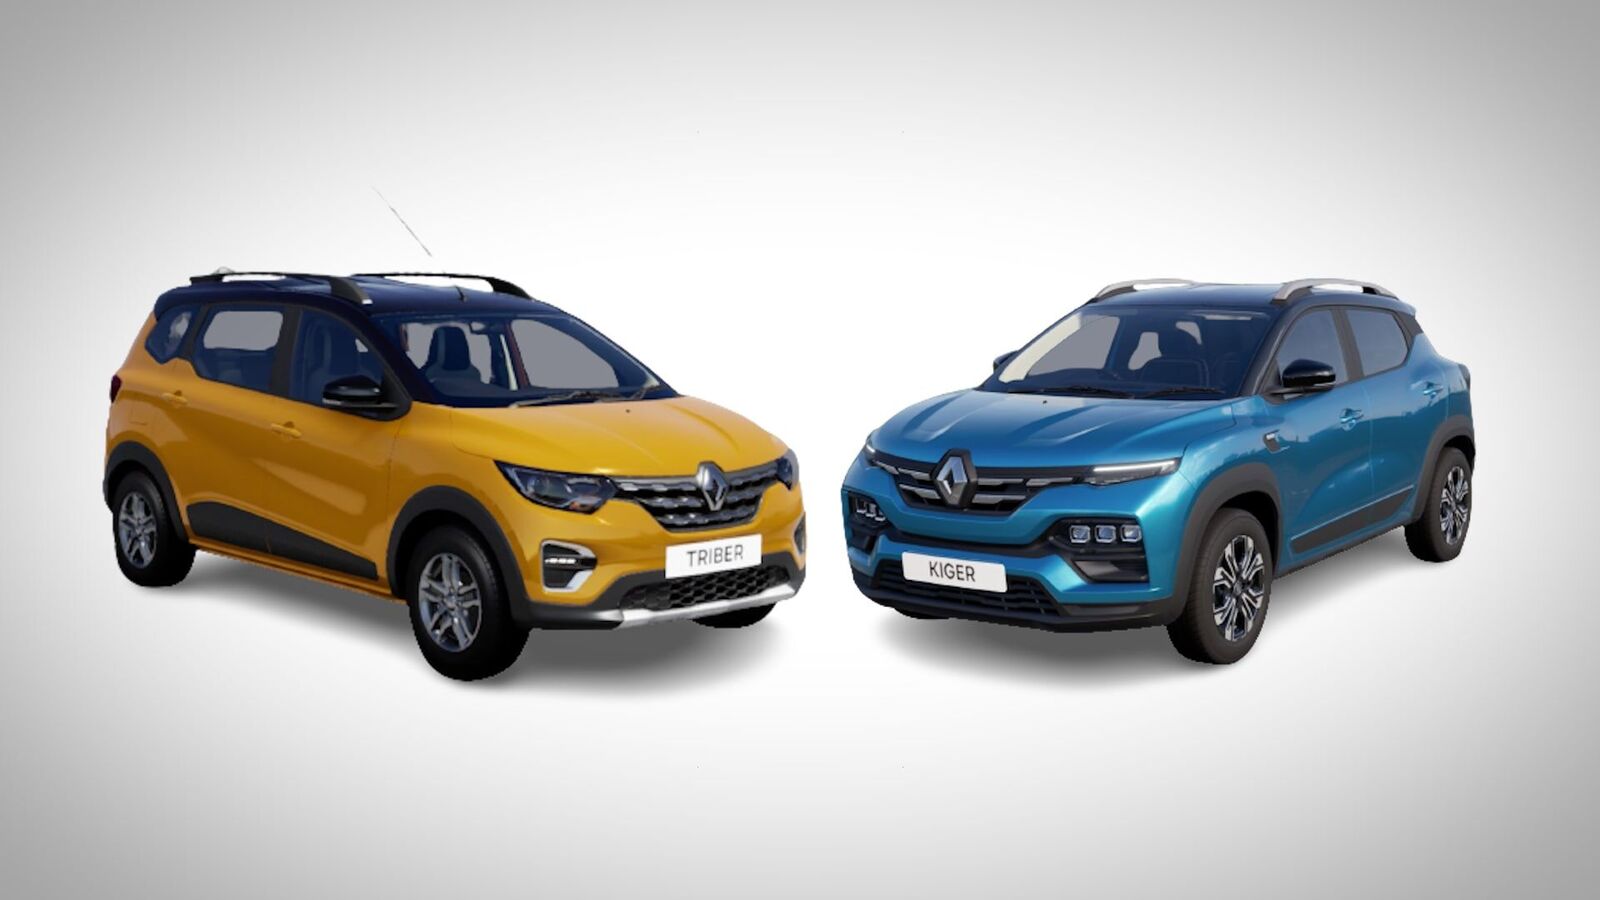 Renault Kwid, Kiger and Triber costs go up amid hikes by a number of carmakers